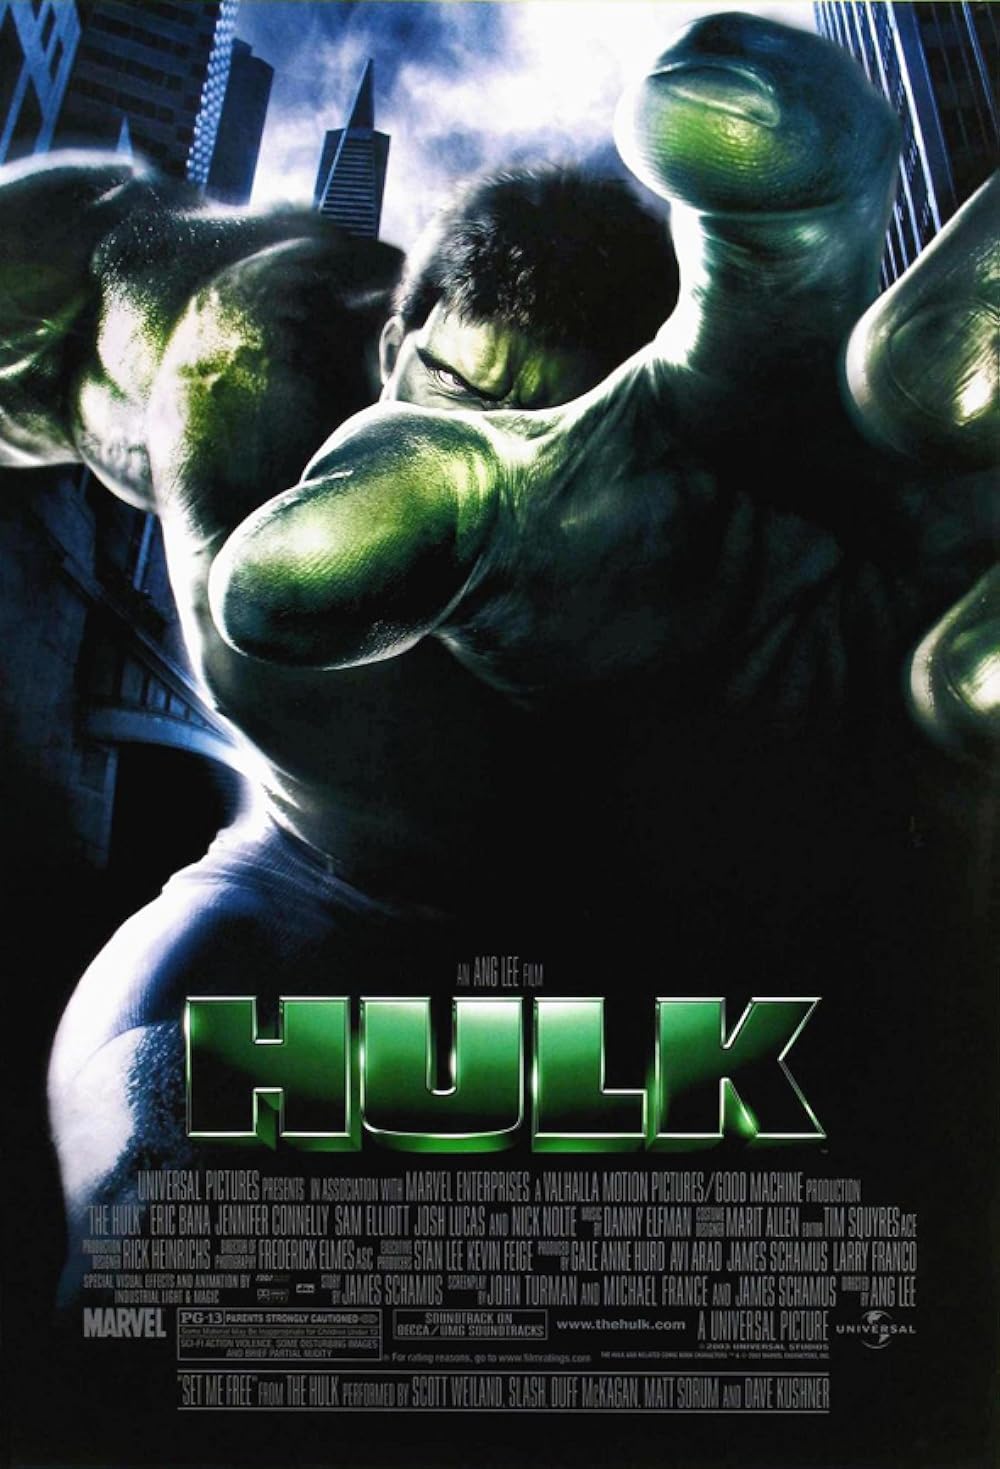 christopher a cole recommends hulk full movie download pic